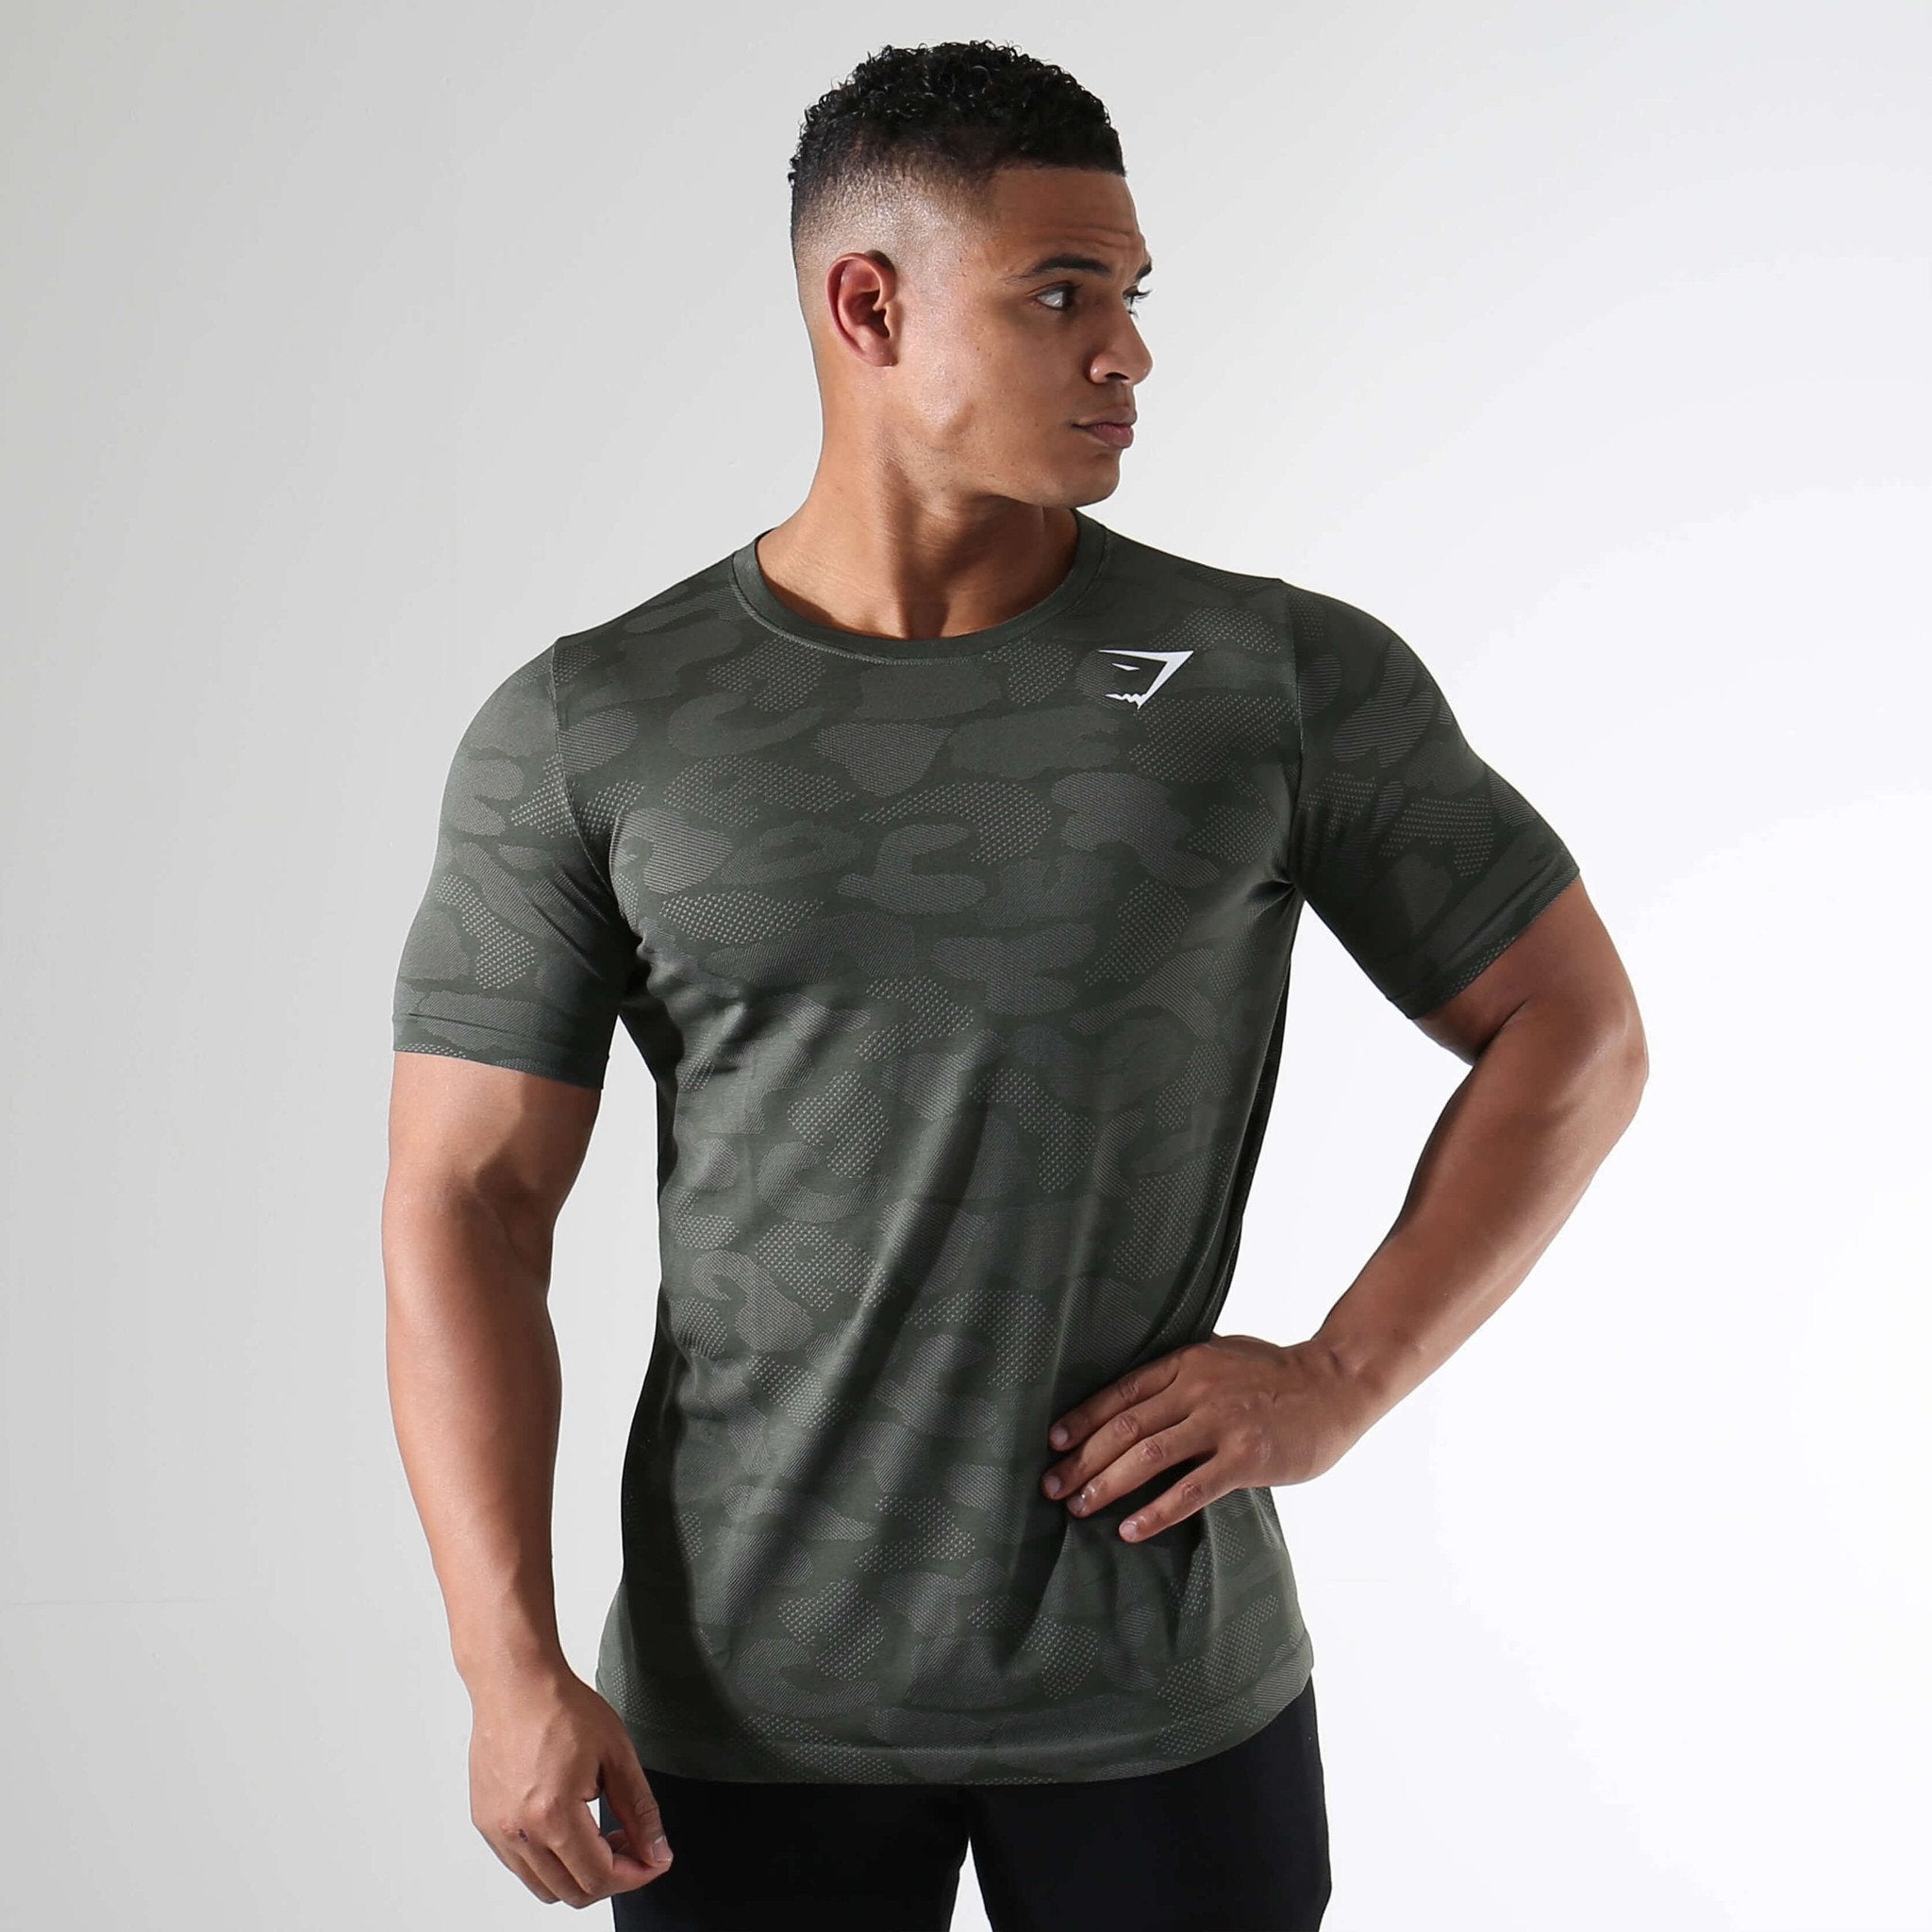 Seamless Stealth T-Shirt in Alpine Green - view 1